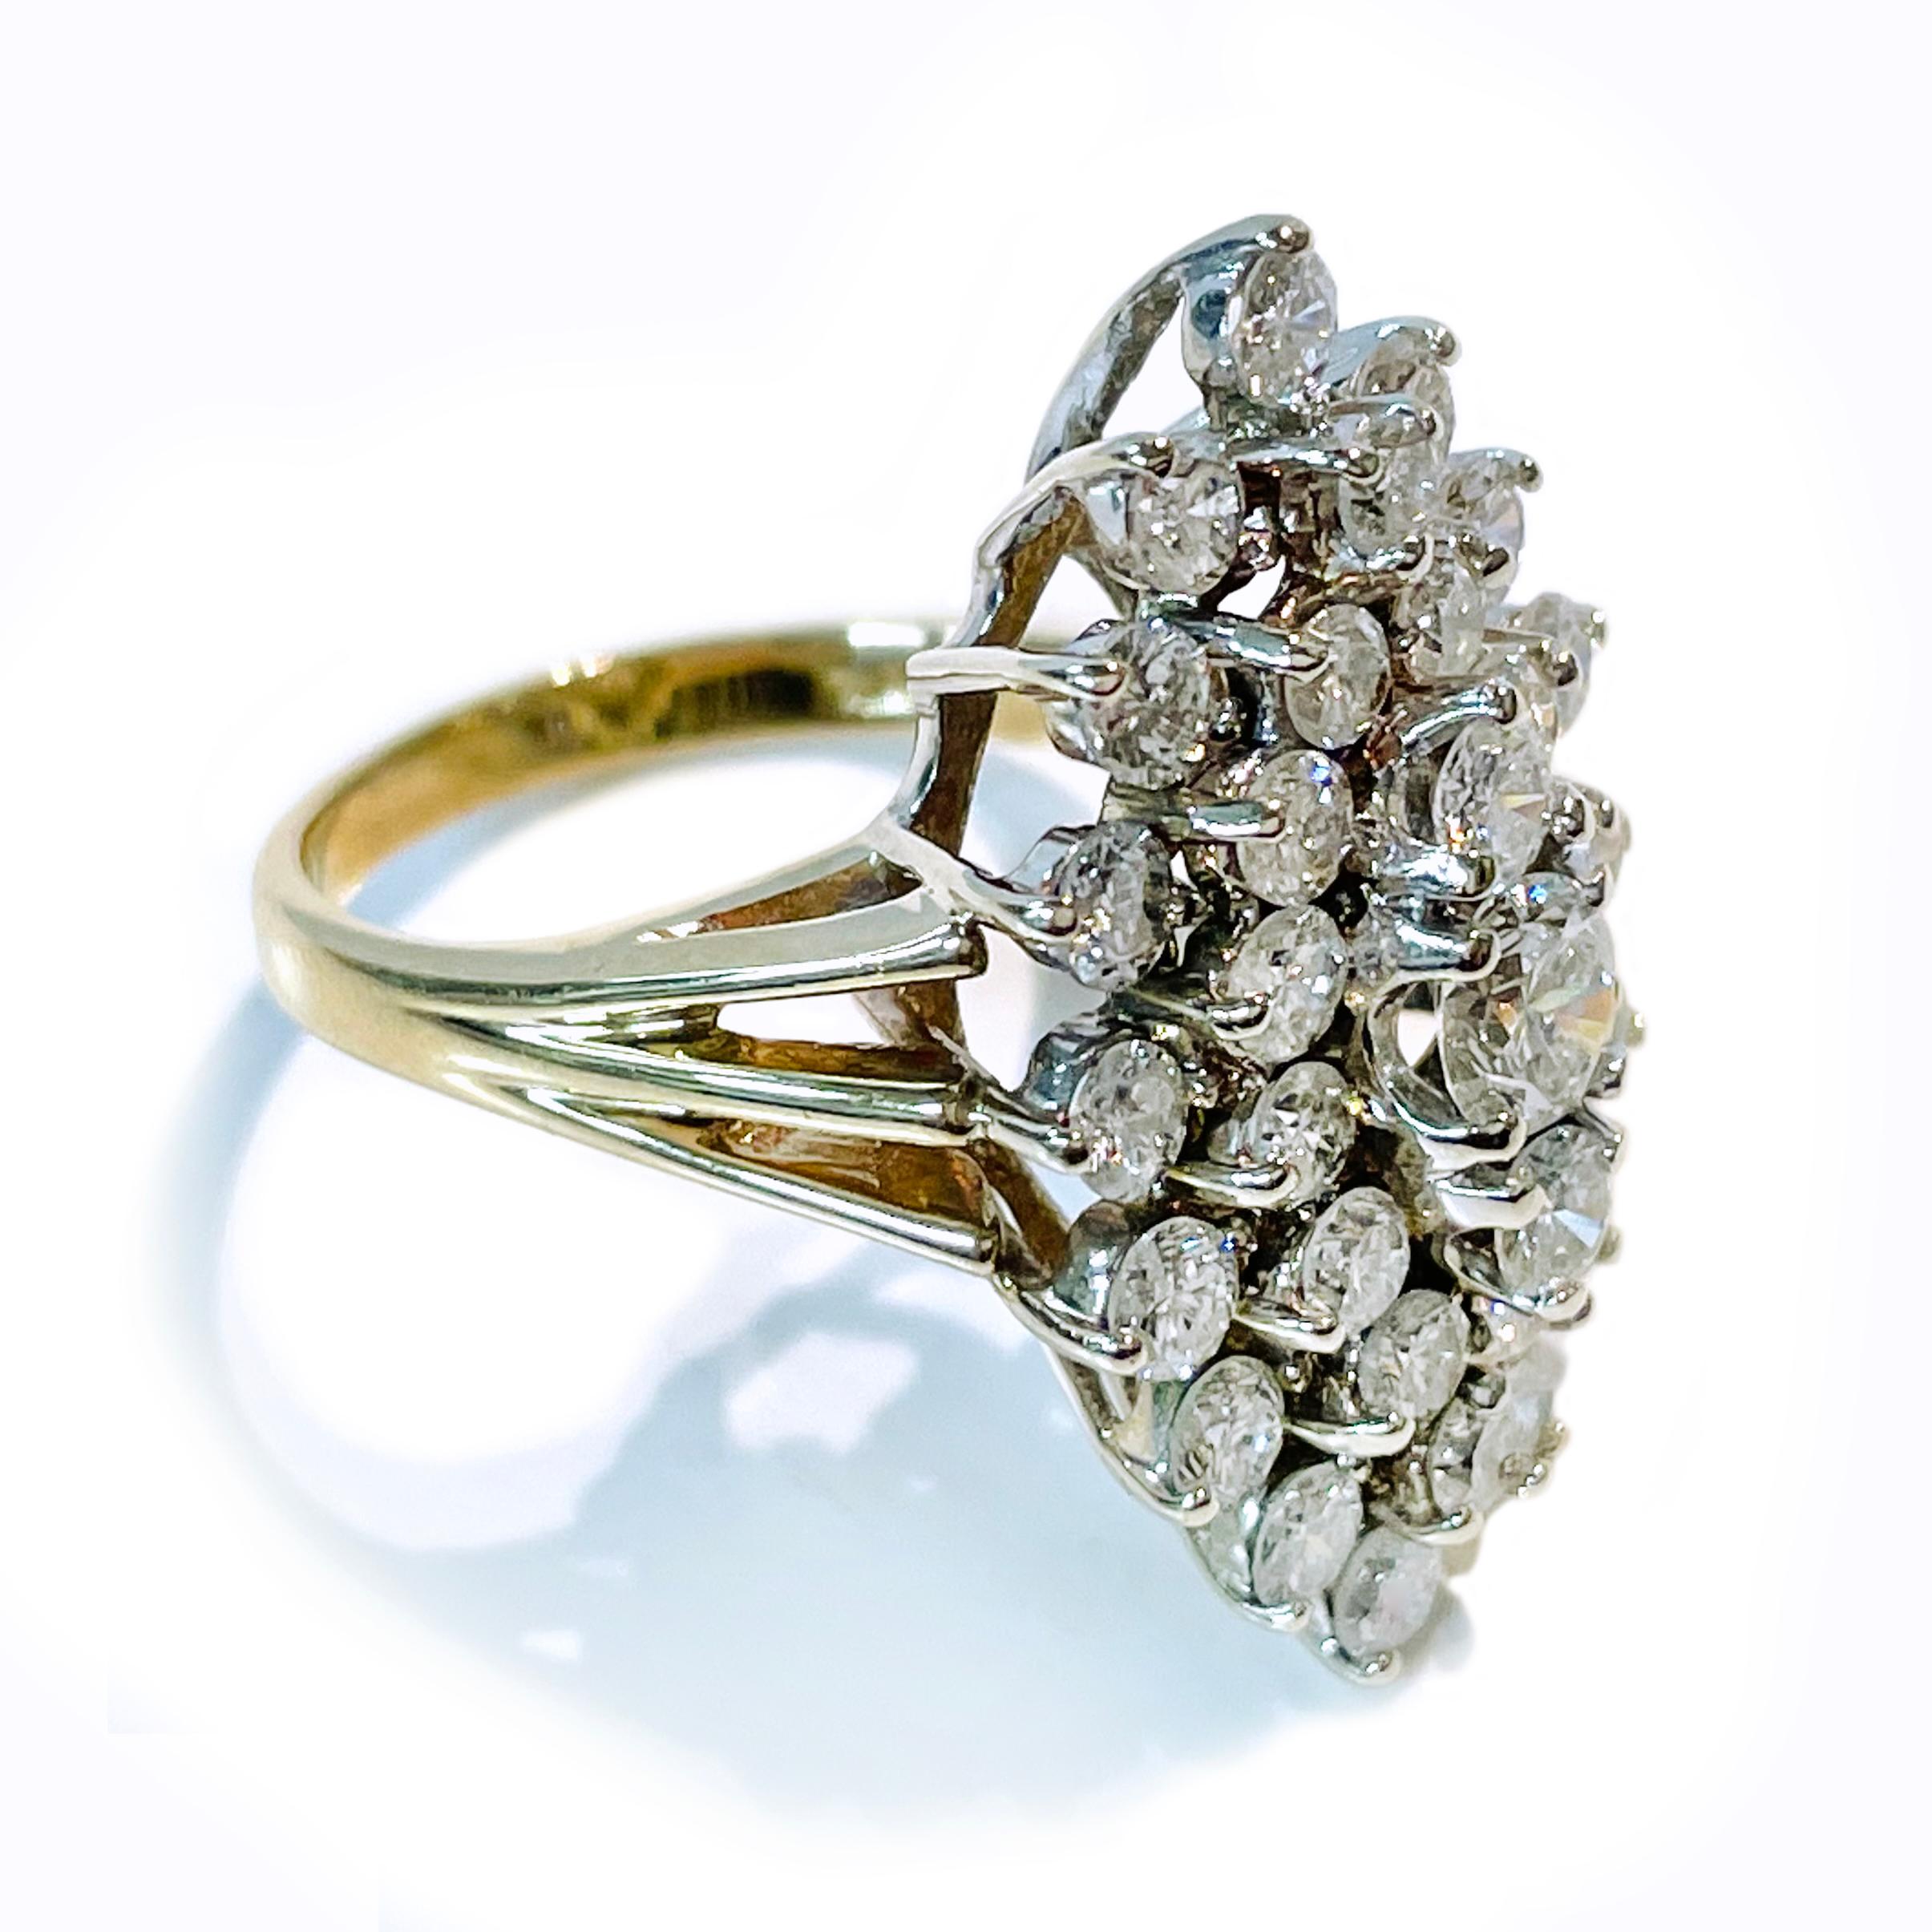 14 Karat Two-Tone Diamond Cluster Ring. The super sparkly ring features a split band and thirty-three brilliant-cut round diamonds. The multi-tiered raised gallery highlights the marquise-shaped formation of the stones. The diamonds range in size